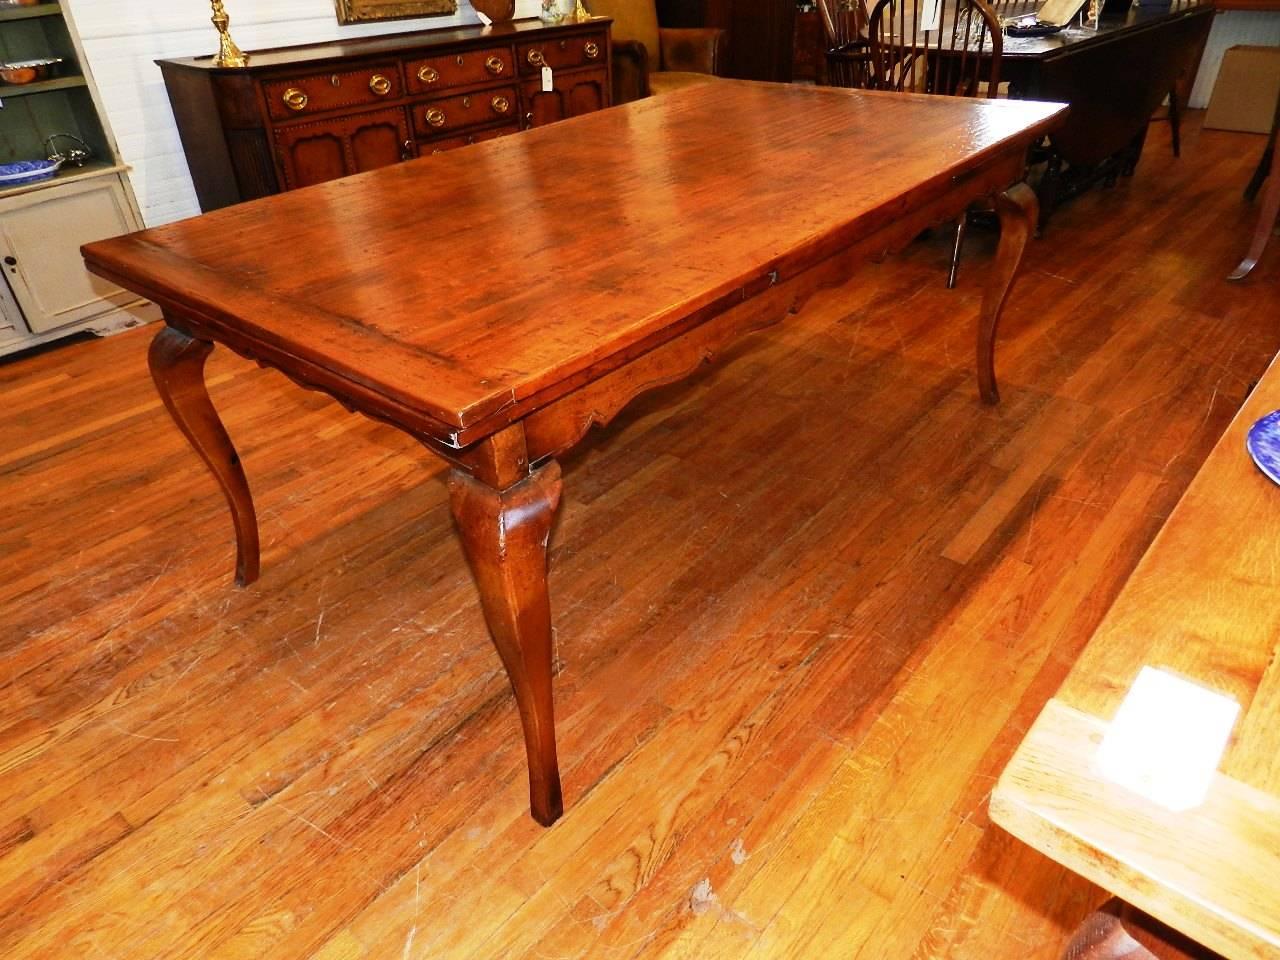 A handmade cherry dining table with two draw leaves giving complete versatility. The table is six foot when both draw leaves are easily slid underneath the table and when leaves are fully out the table extends to ten foot. By easing the top of the